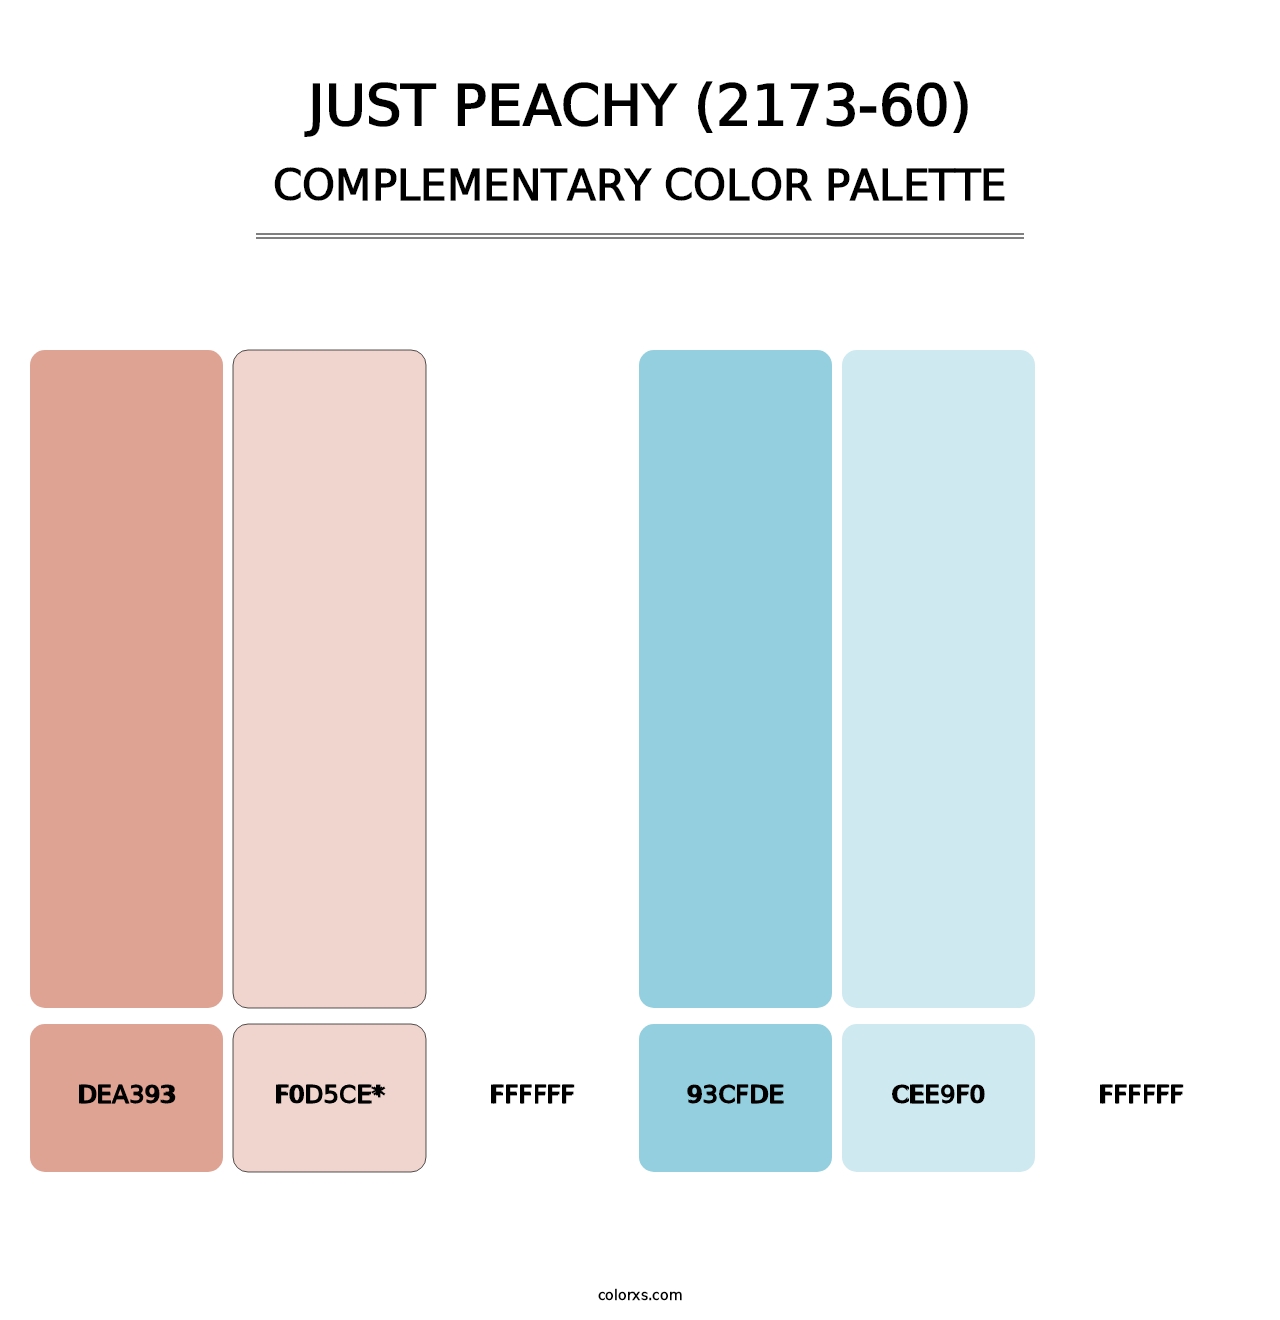 Just Peachy (2173-60) - Complementary Color Palette